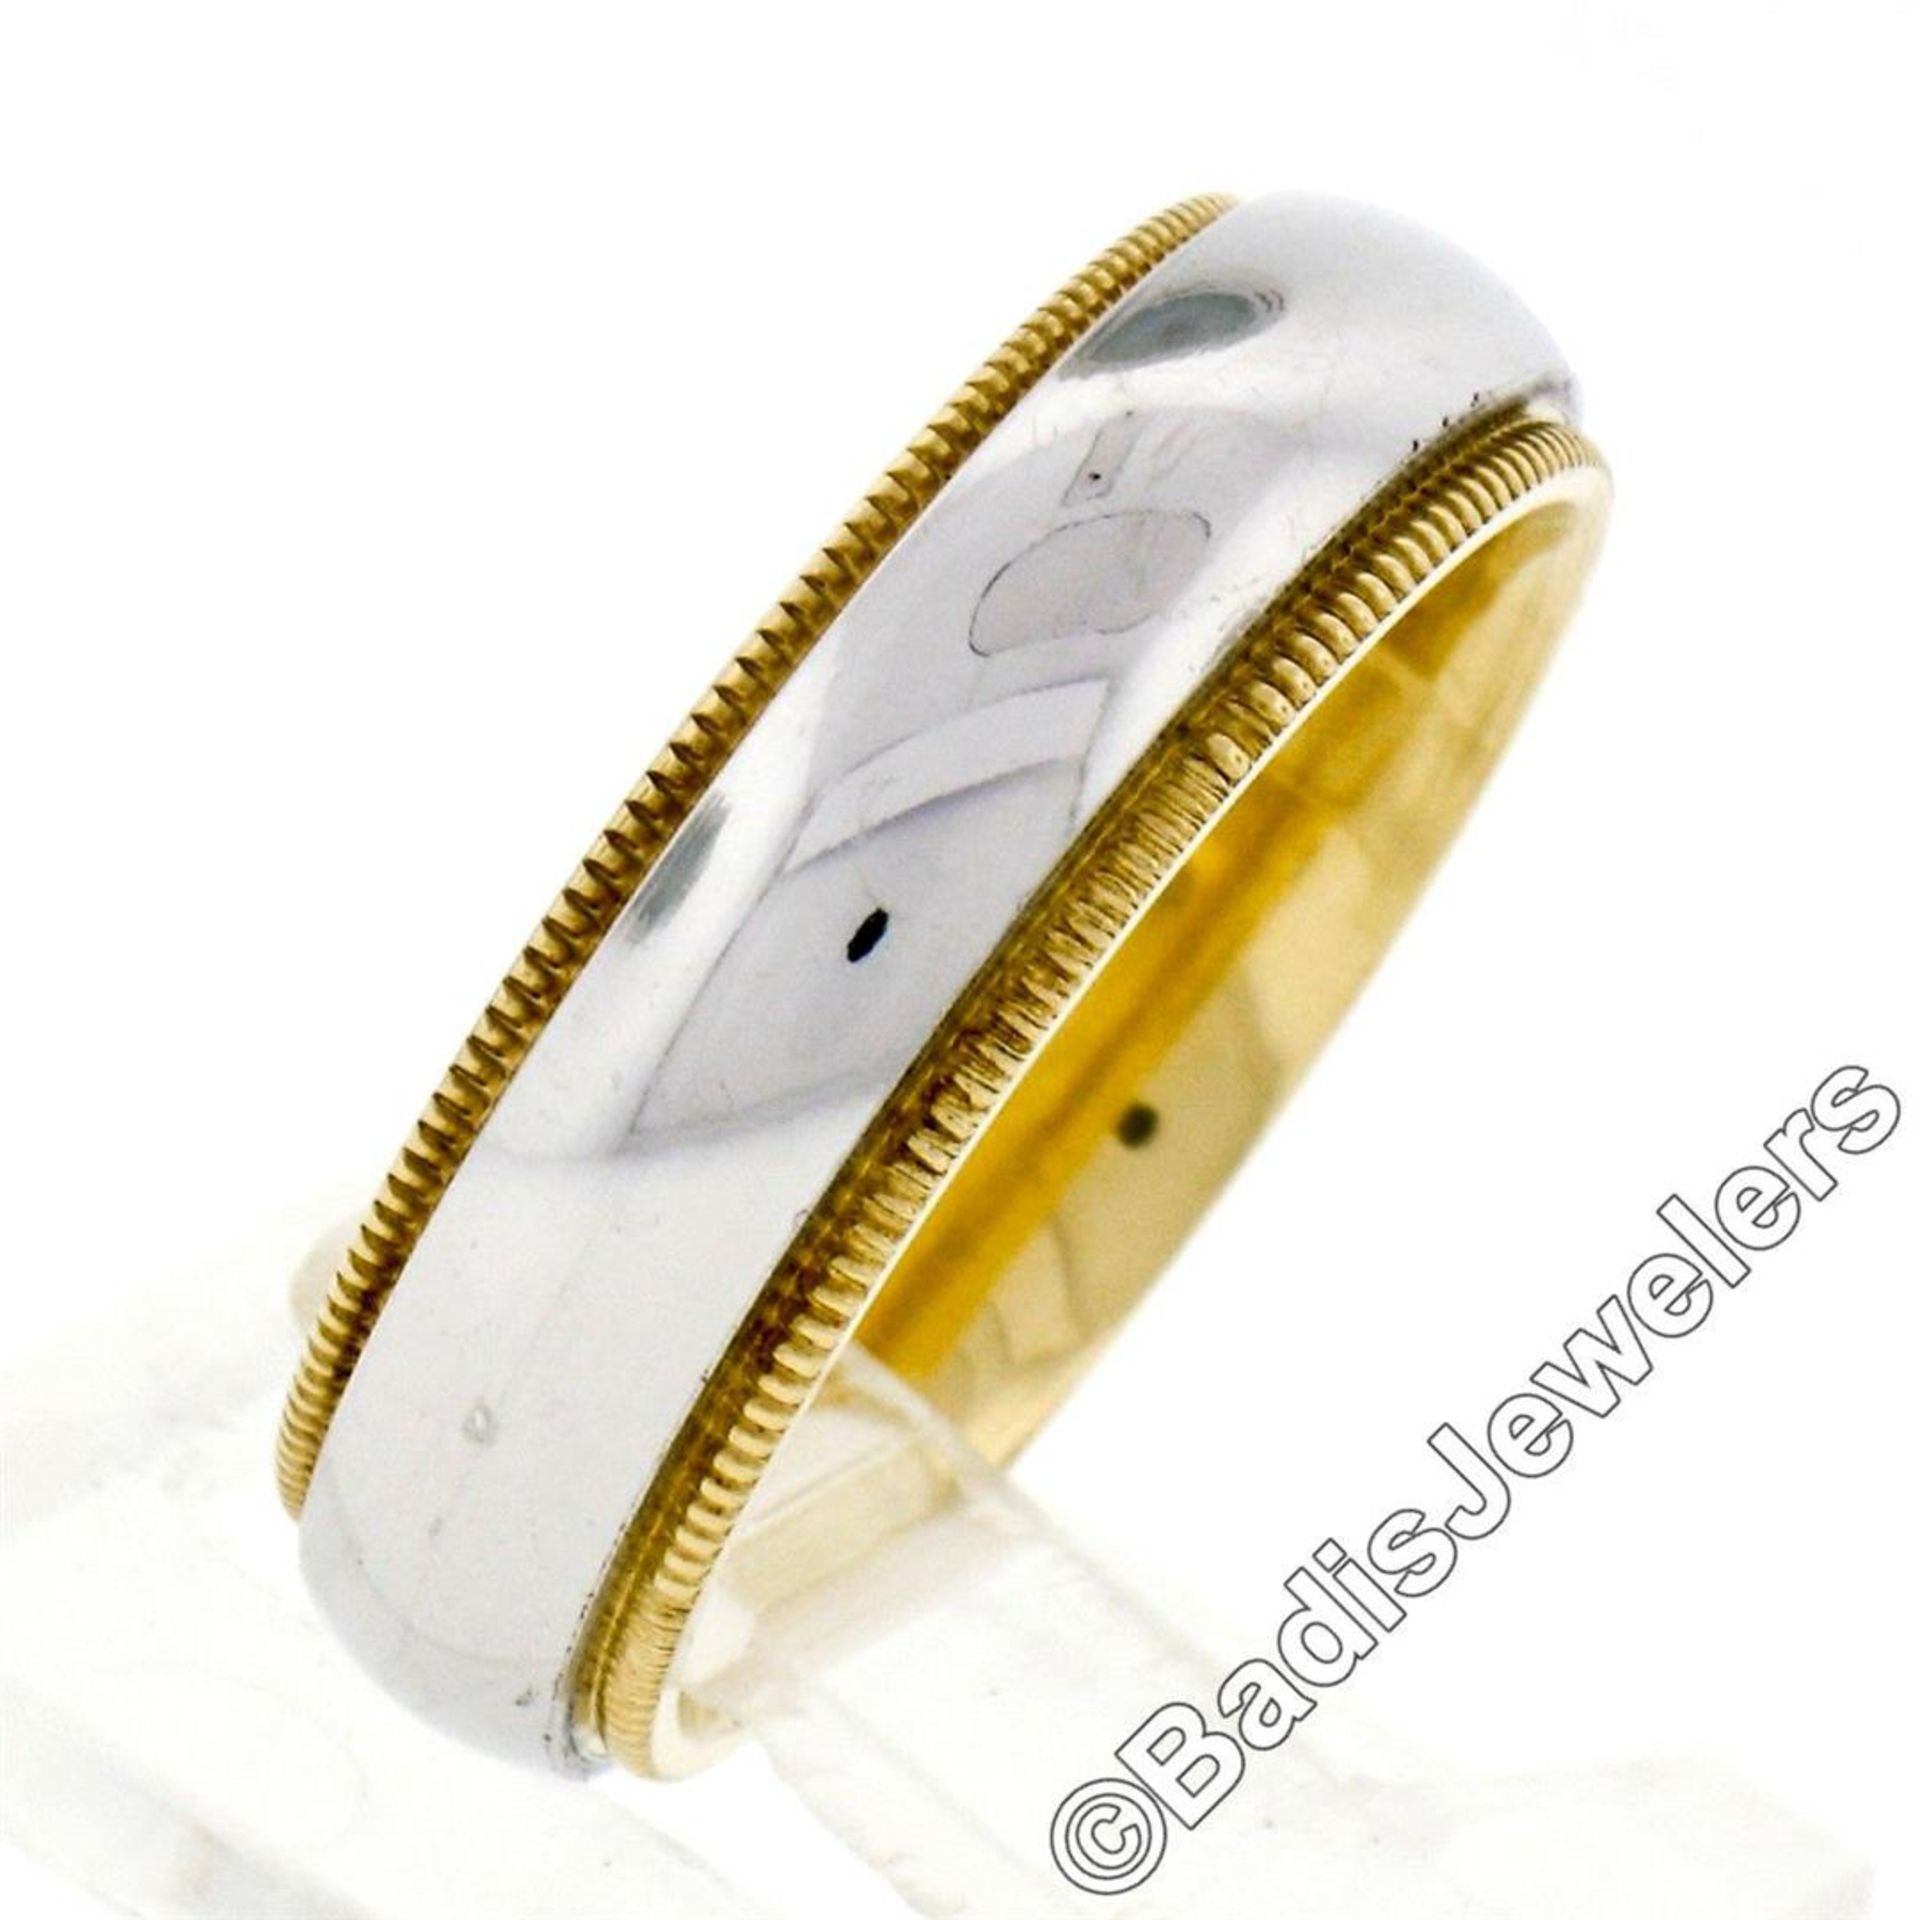 Men's 18kt White and Yellow Gold 5.5mm Milgrain Edged Band Ring - Image 5 of 7